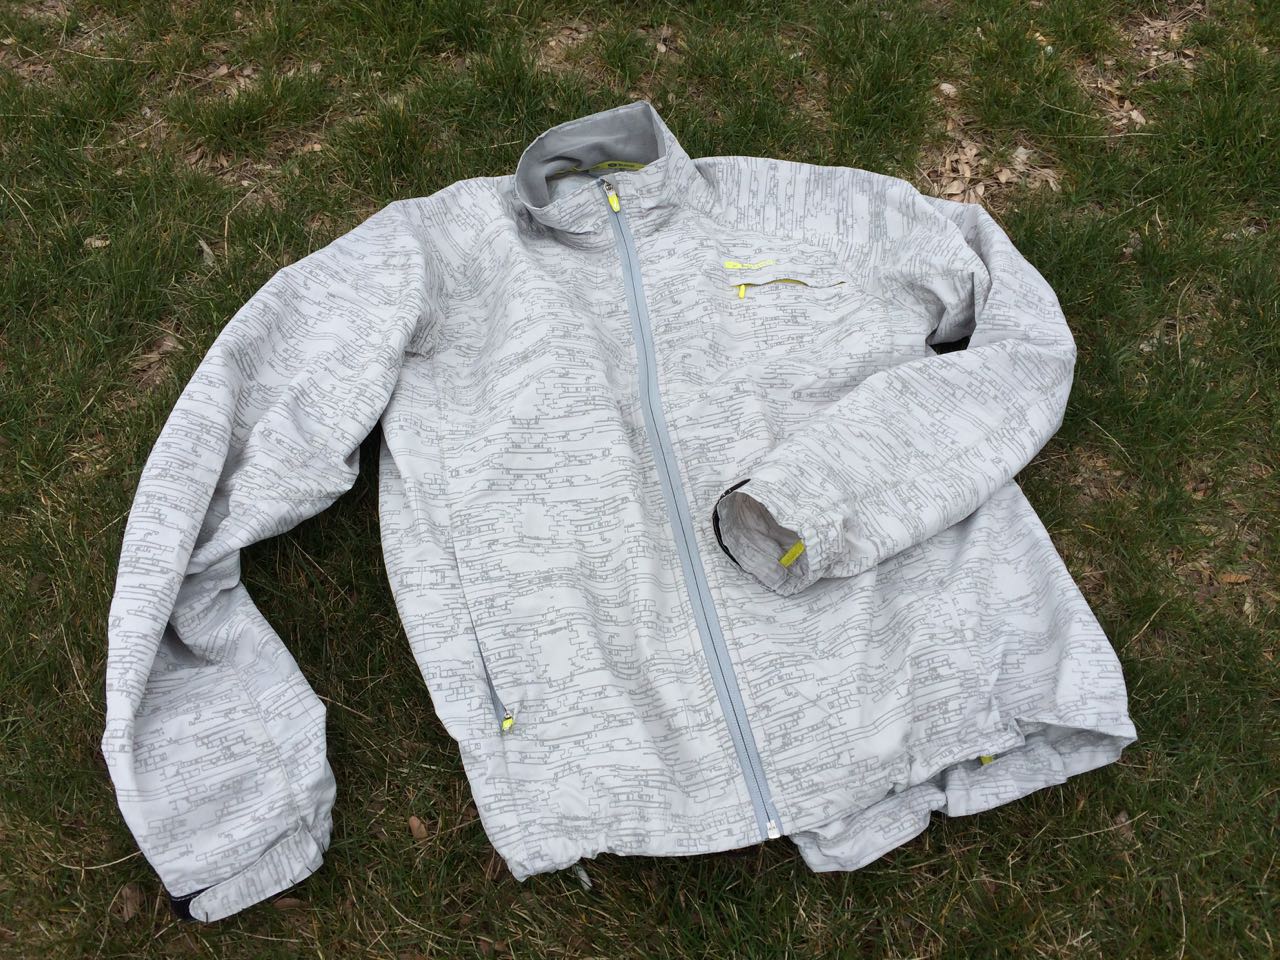 Review: Be Seen in the Sugoi Zap Run Jacket - FeedTheHabit.com